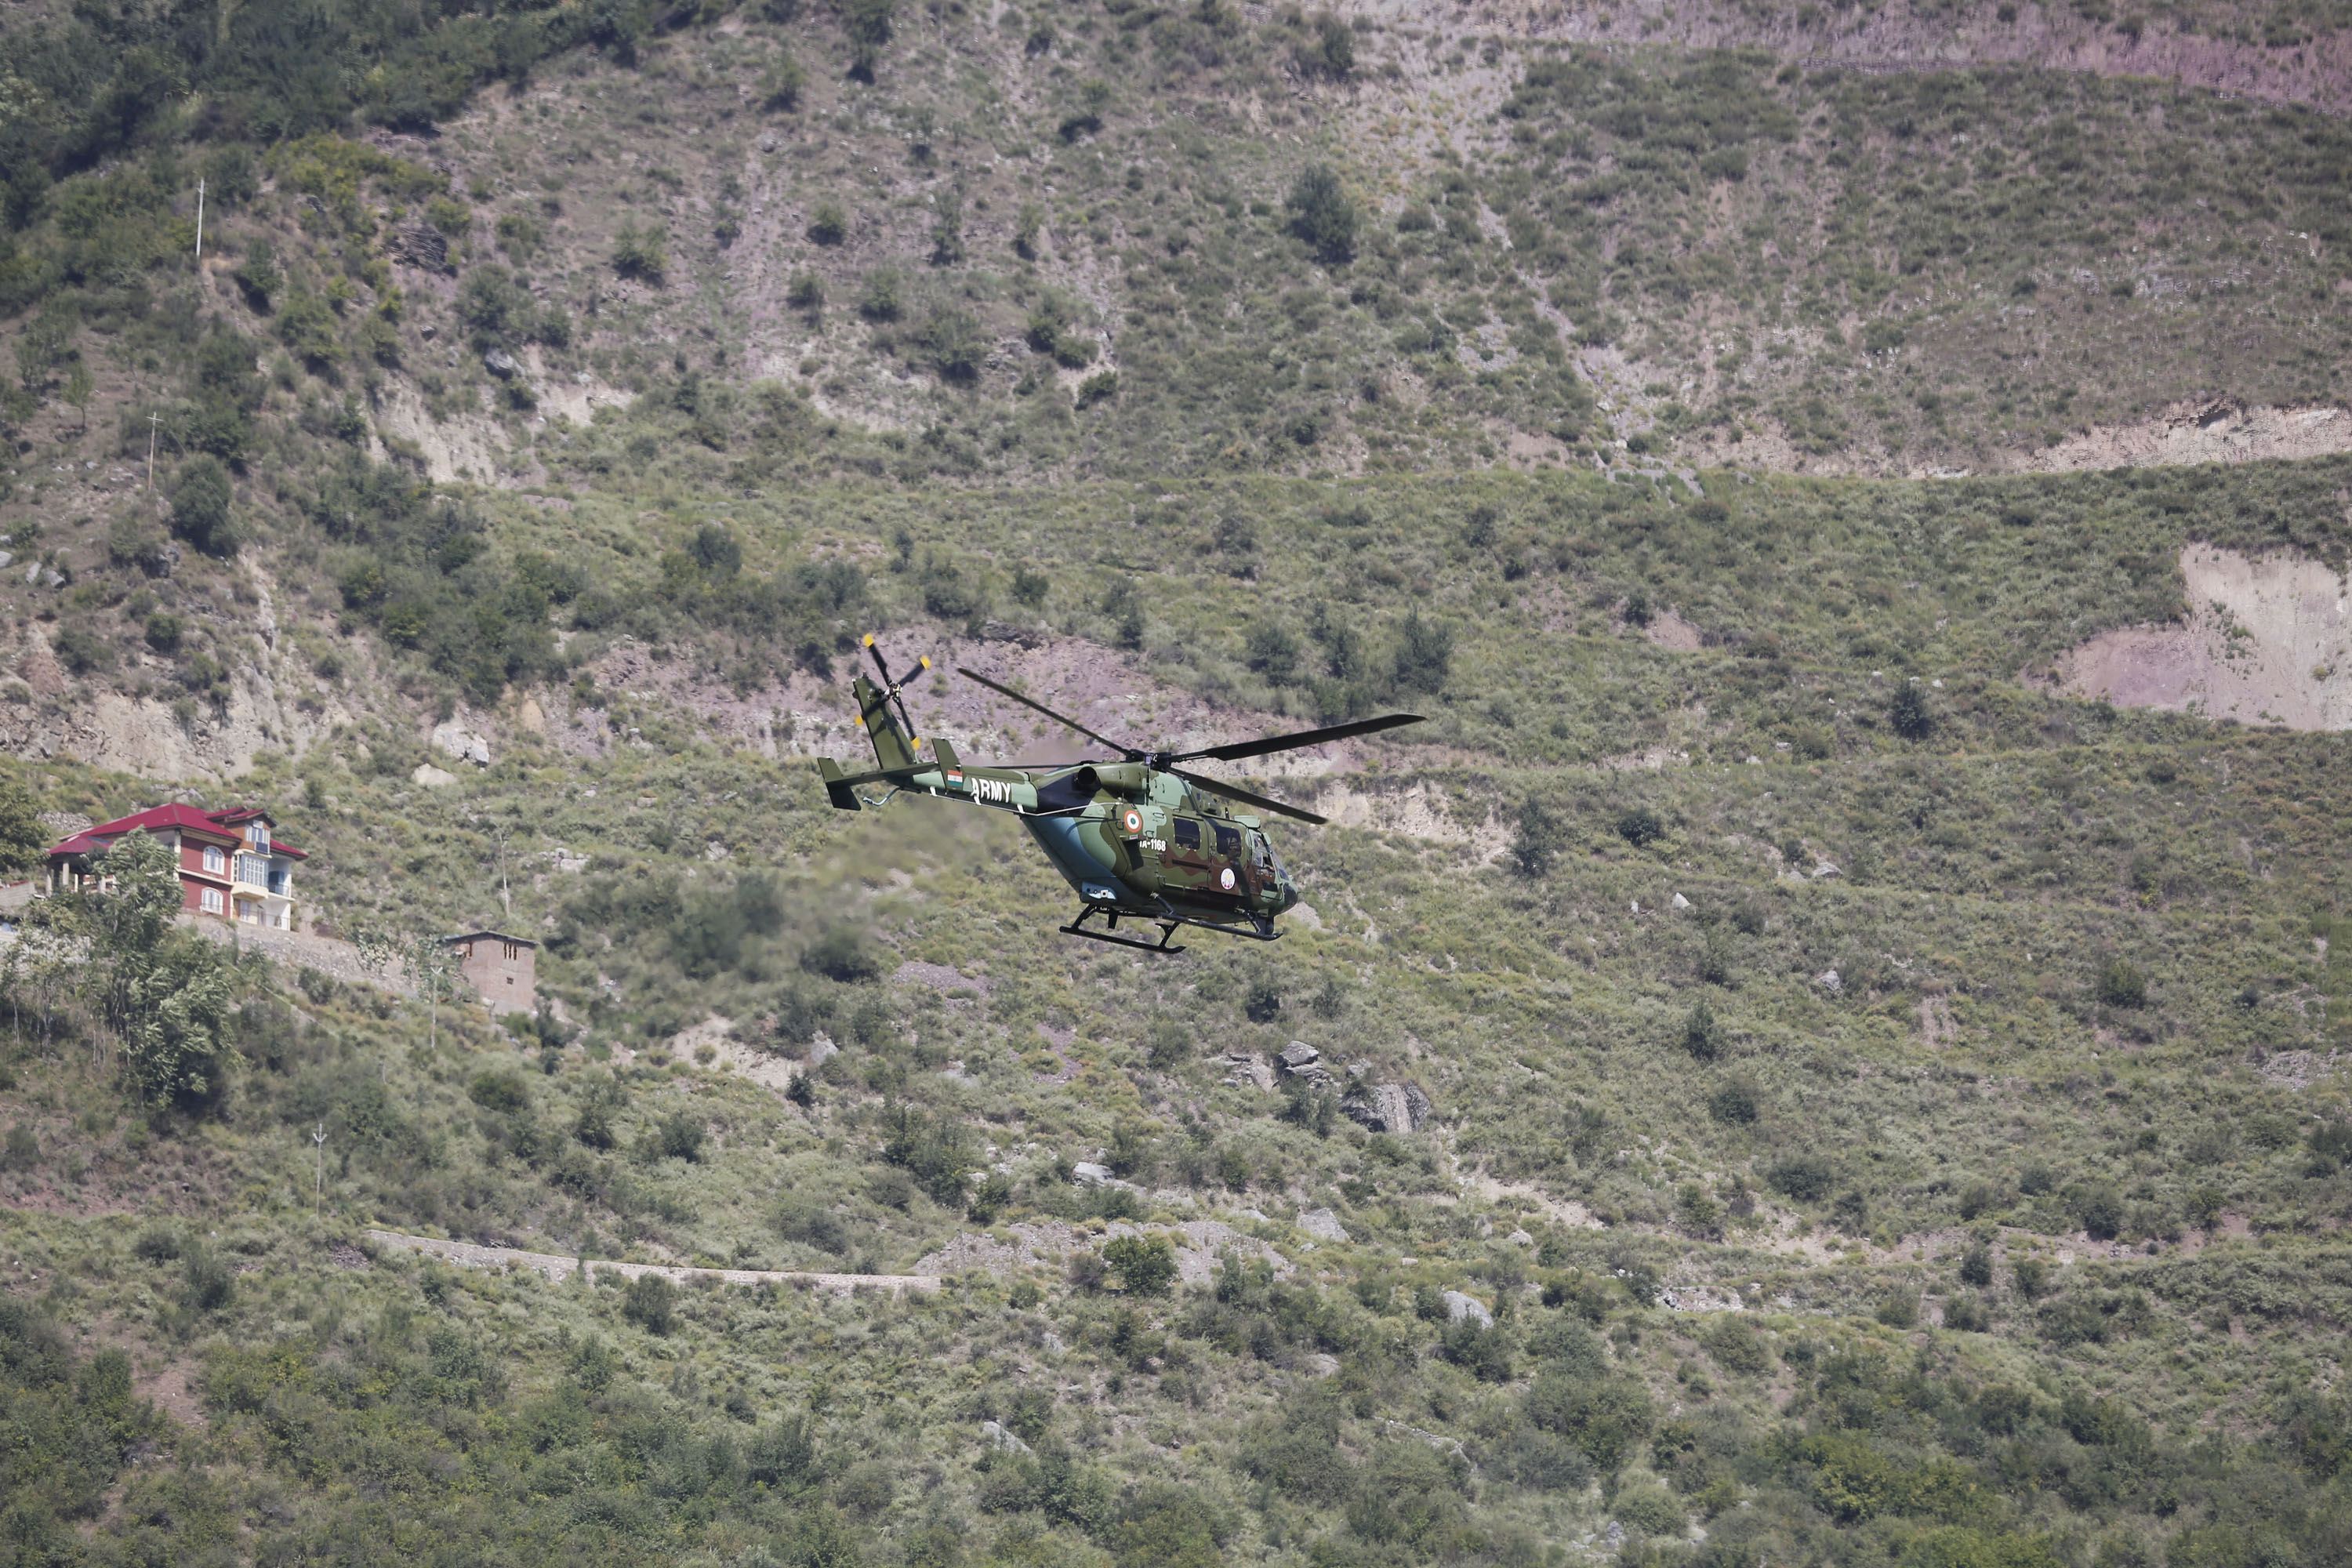 Scores of helicopter sorties roved over Uri on September 18, 2016 following the militant attack. (KL Image: Bilal Bahadur)